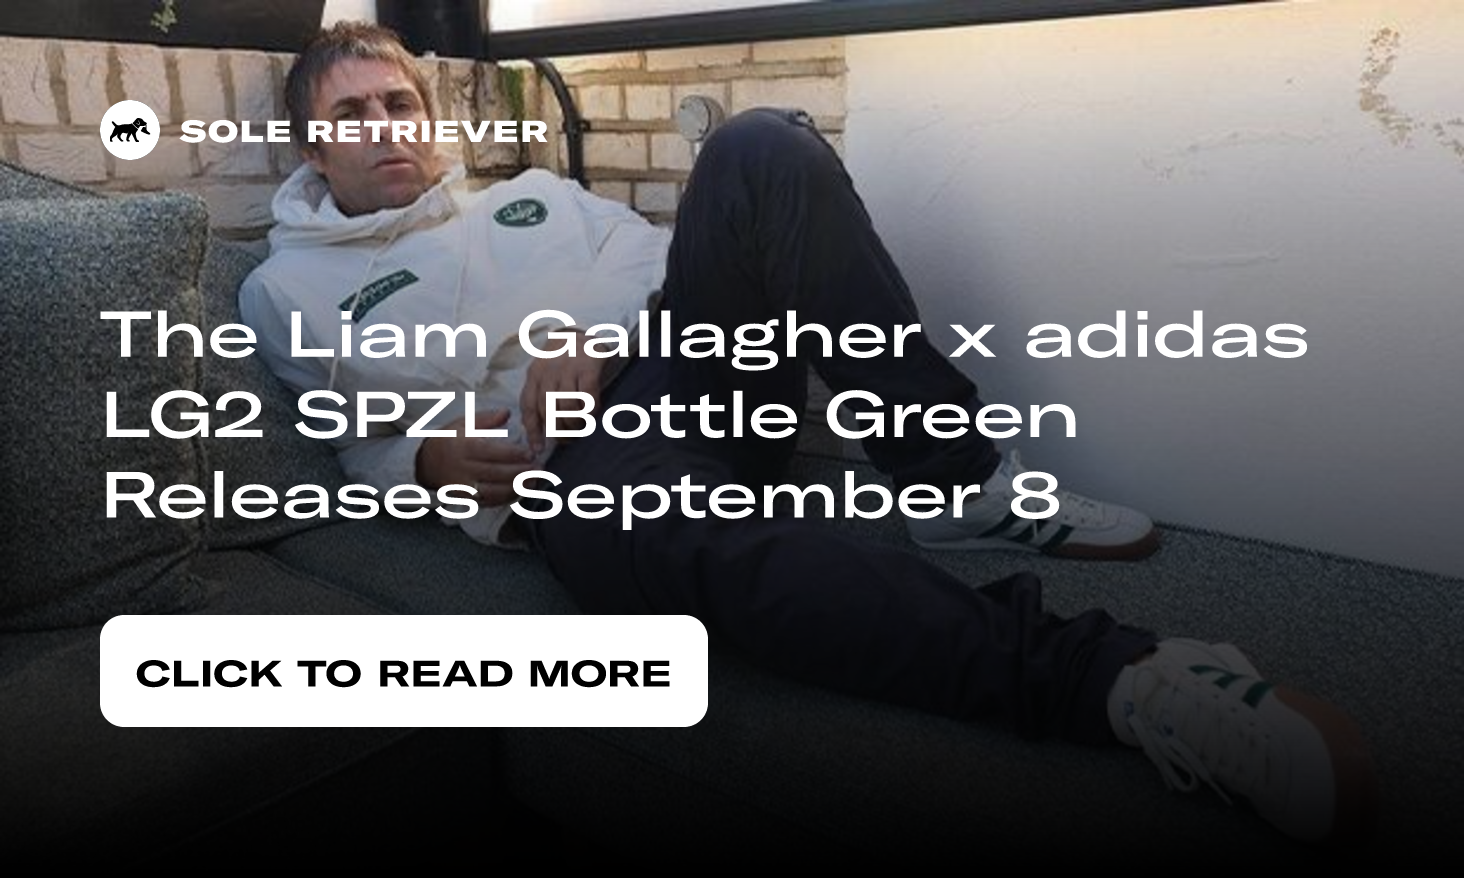 The Liam Gallagher x adidas LG2 SPZL Bottle Green Releases